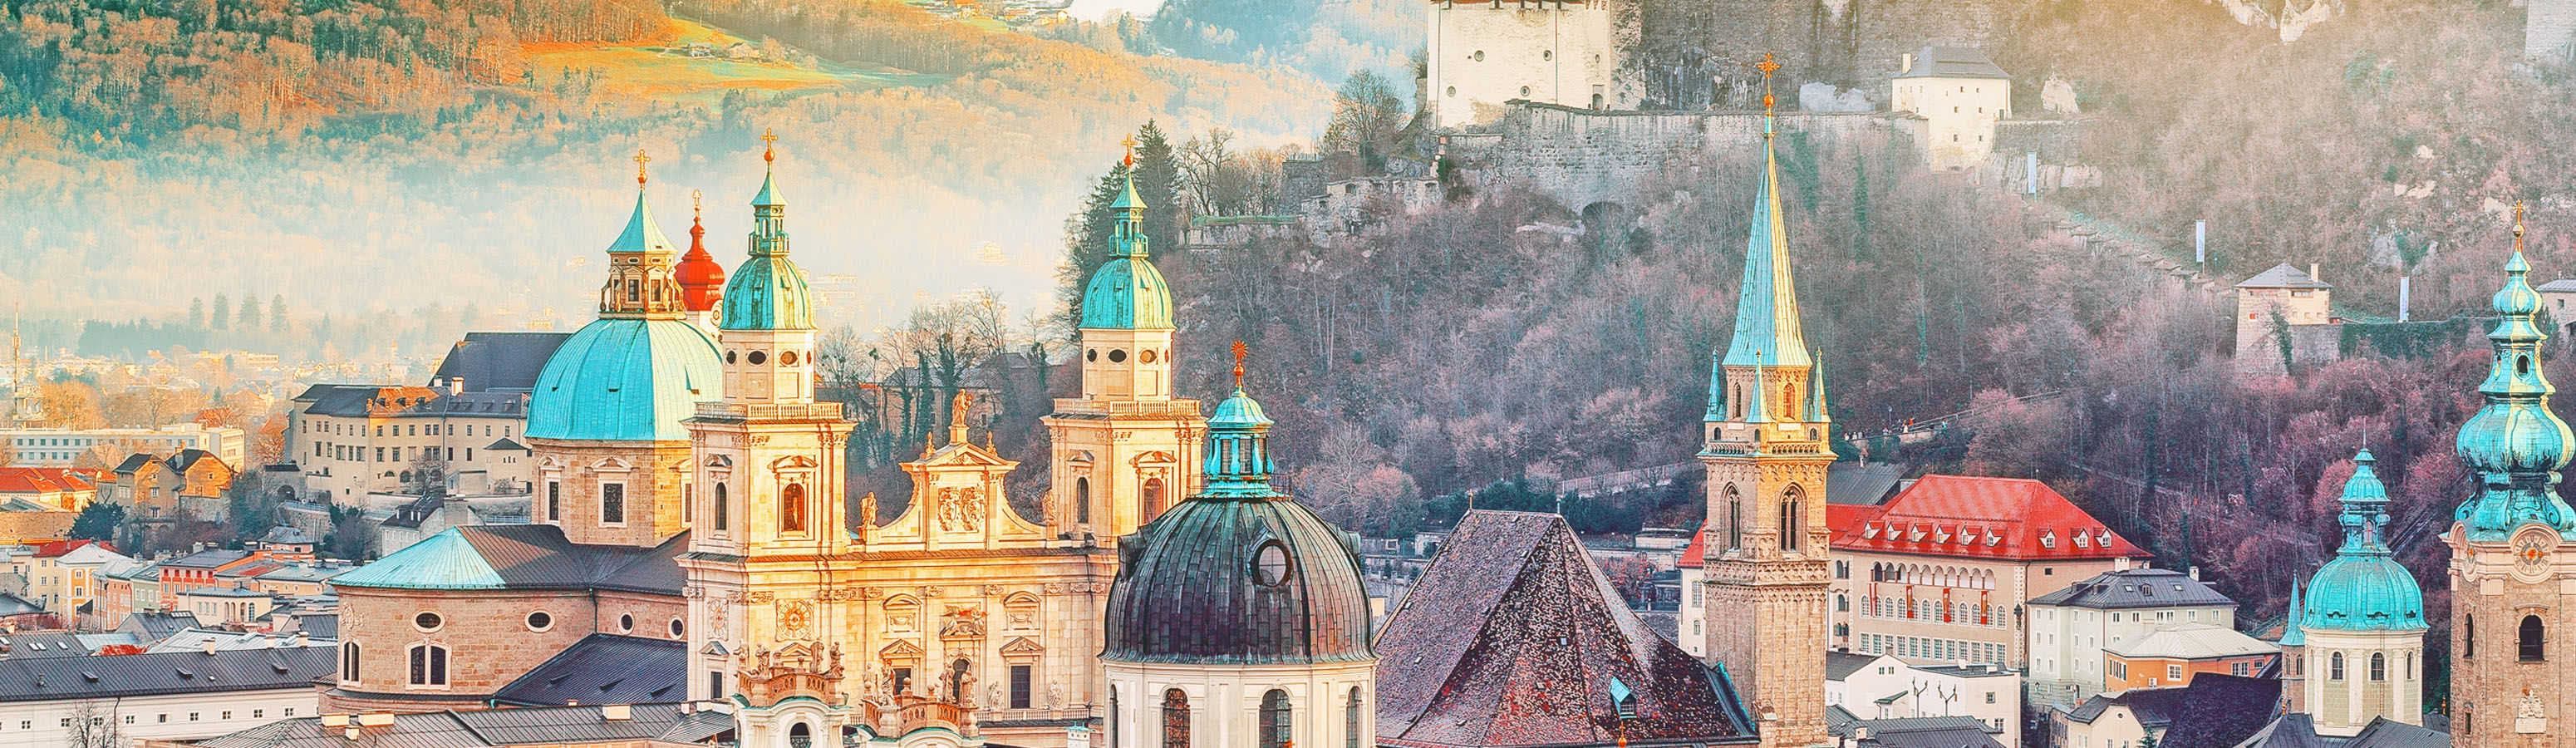 Austria attracts goodness and sights